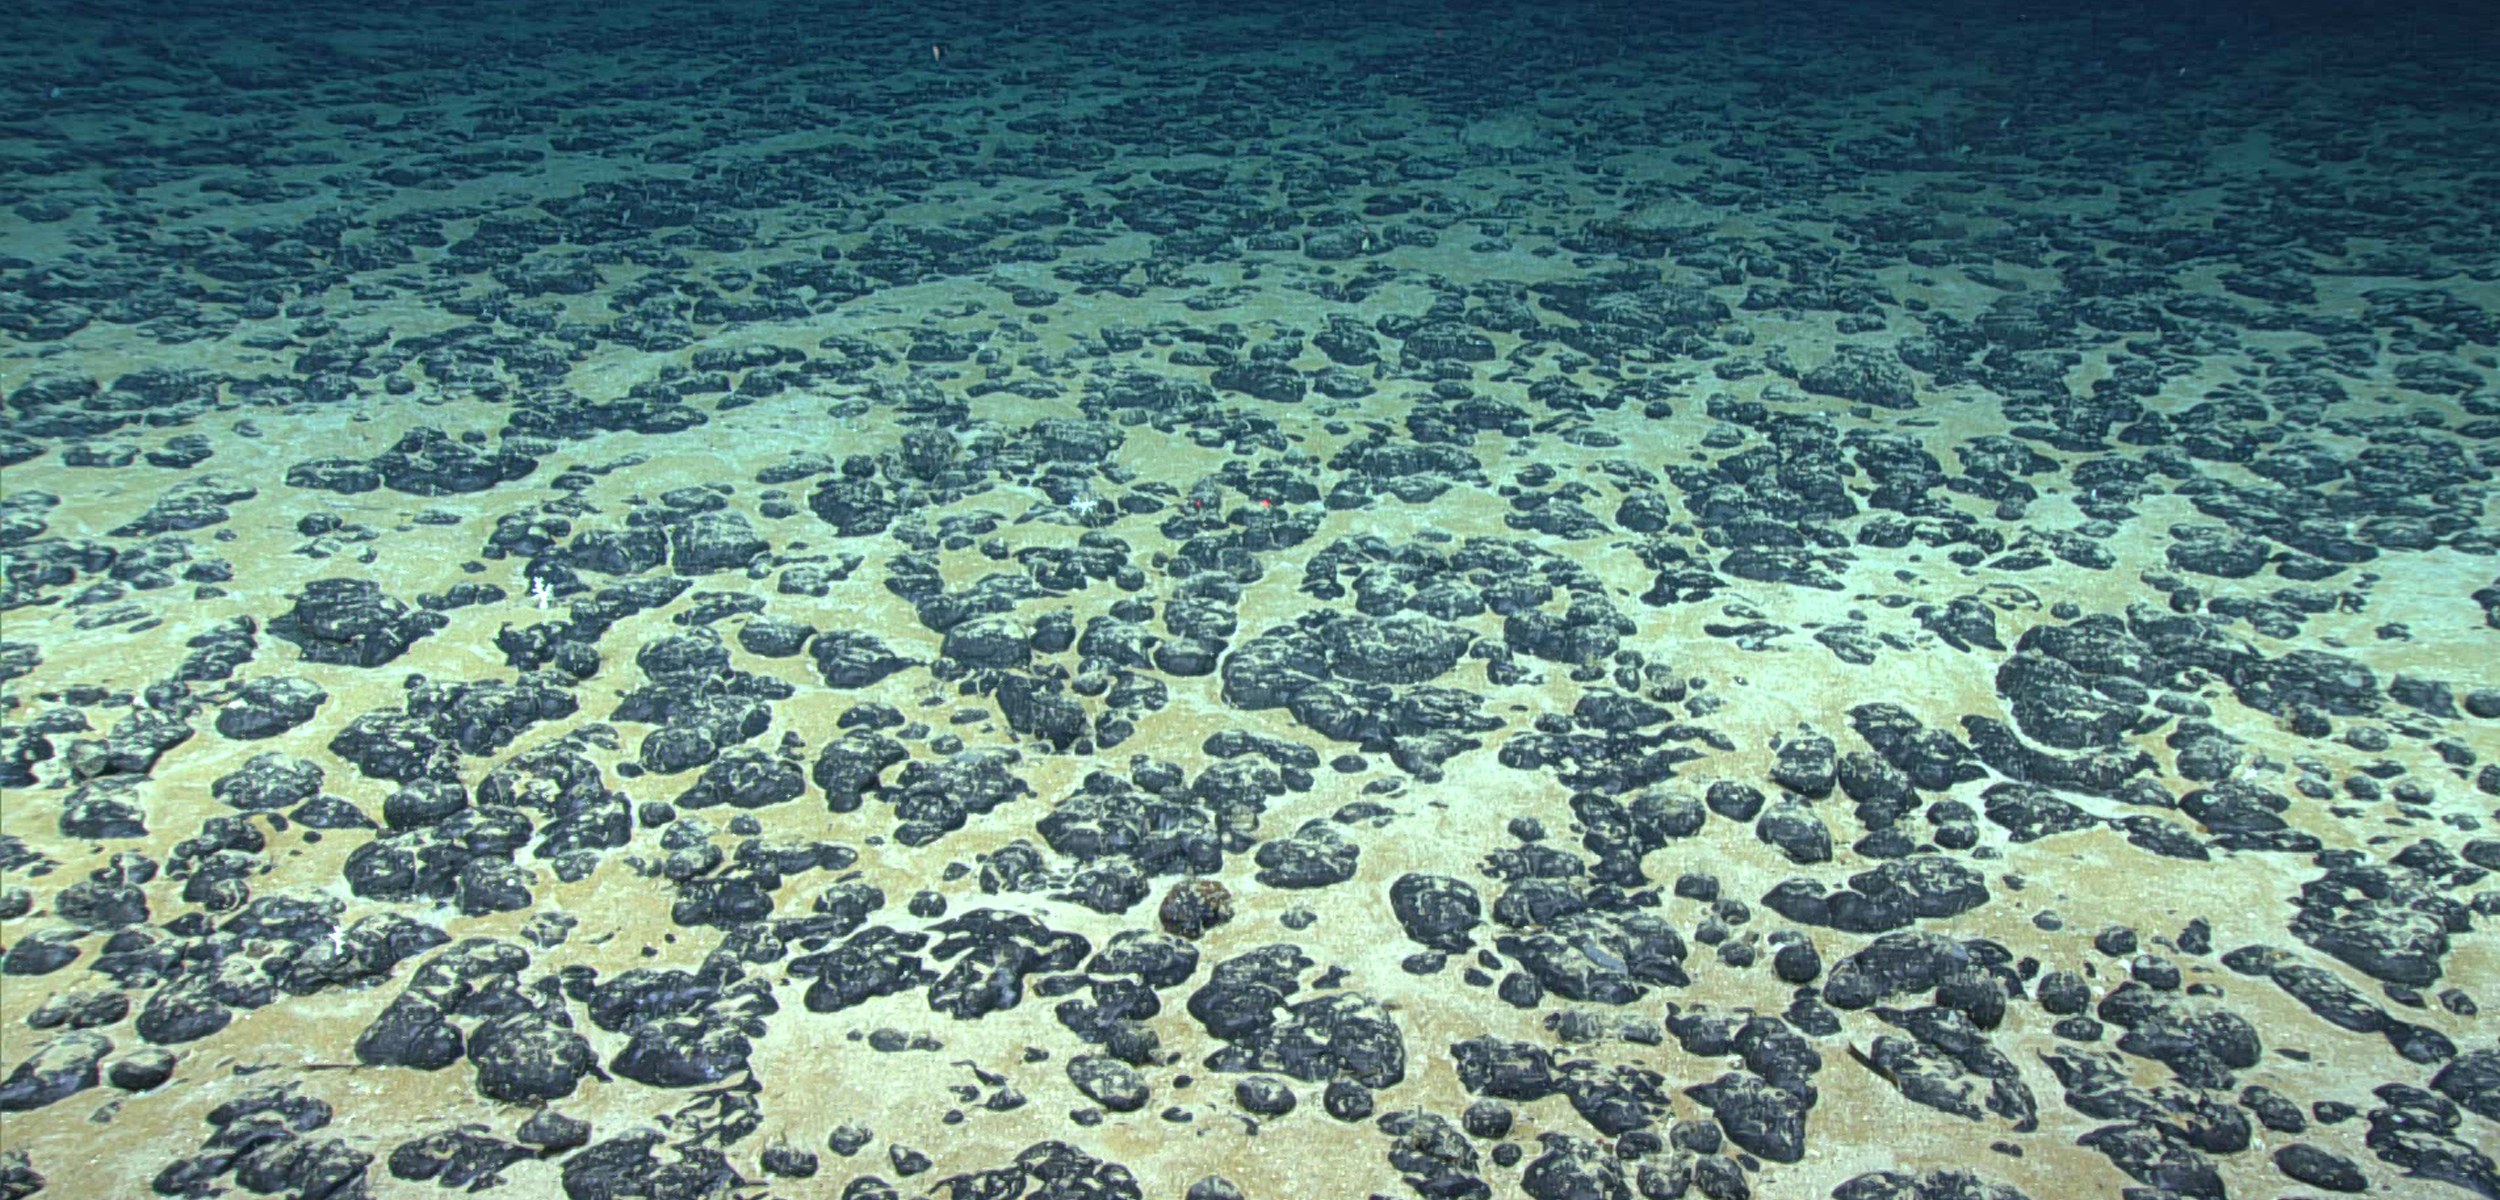 small black nodules sit on the bottom of a sandy blue seafloor